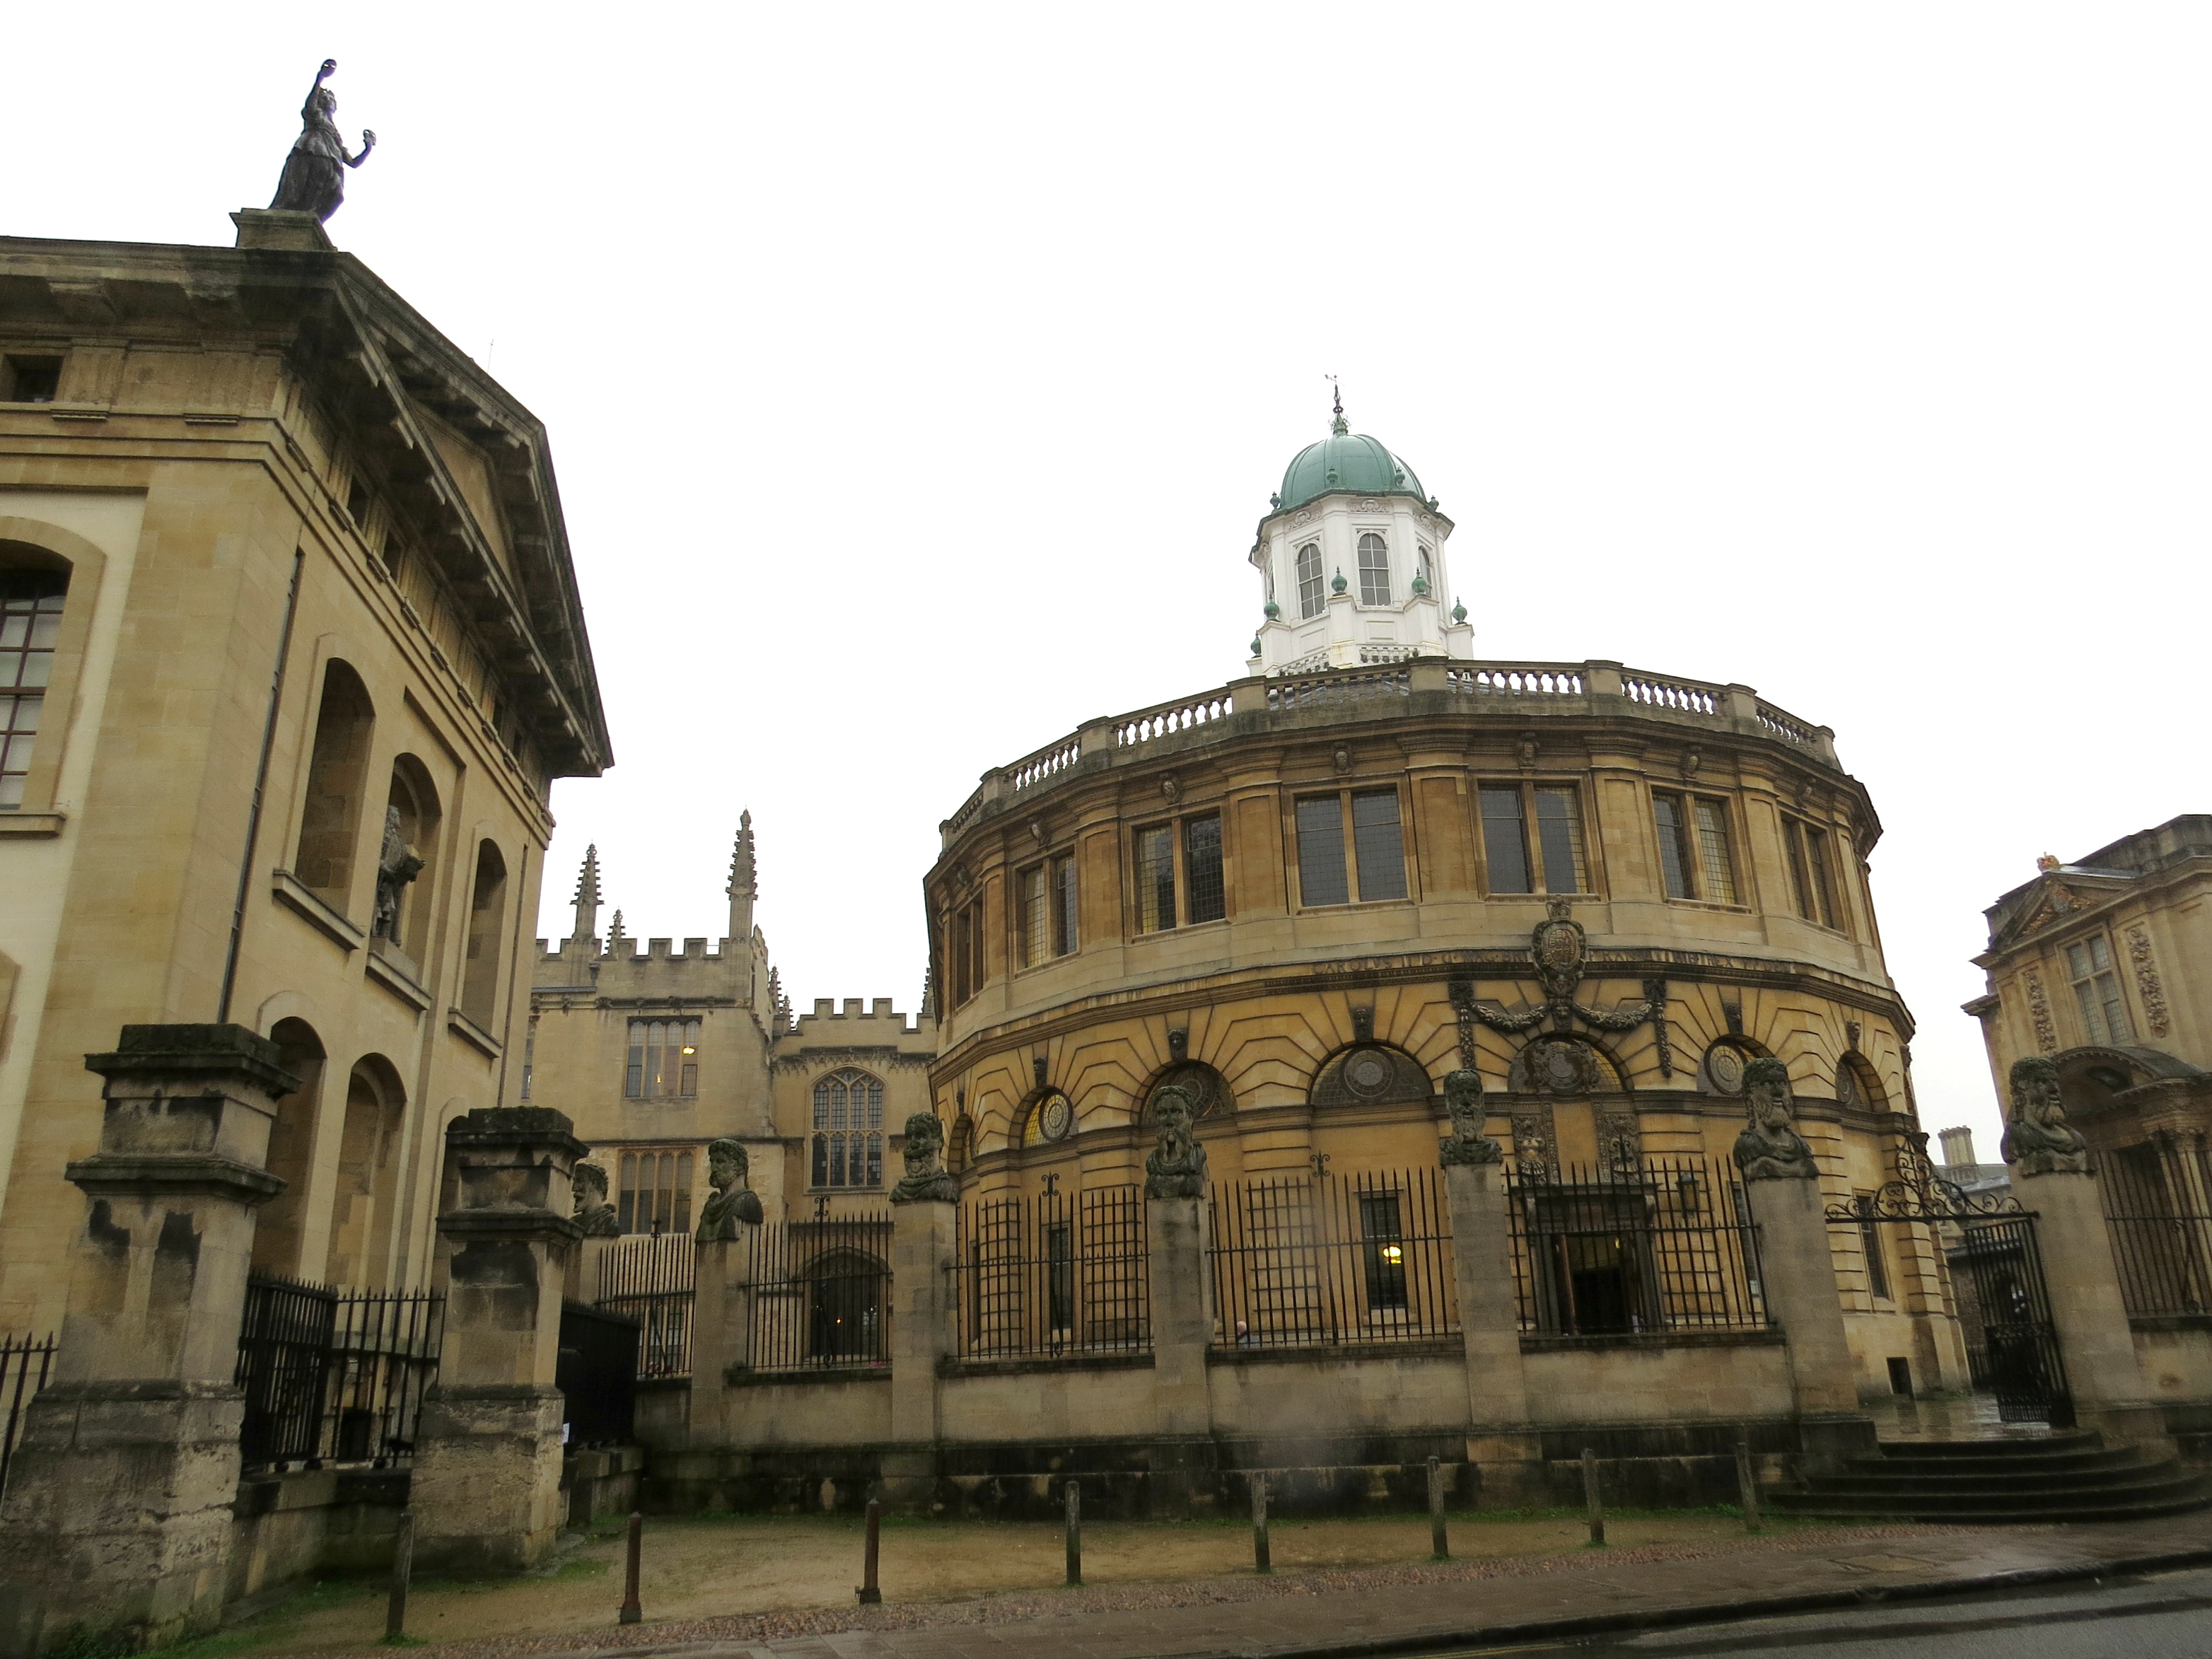 Which Should I Visit: Oxford or Cambridge?